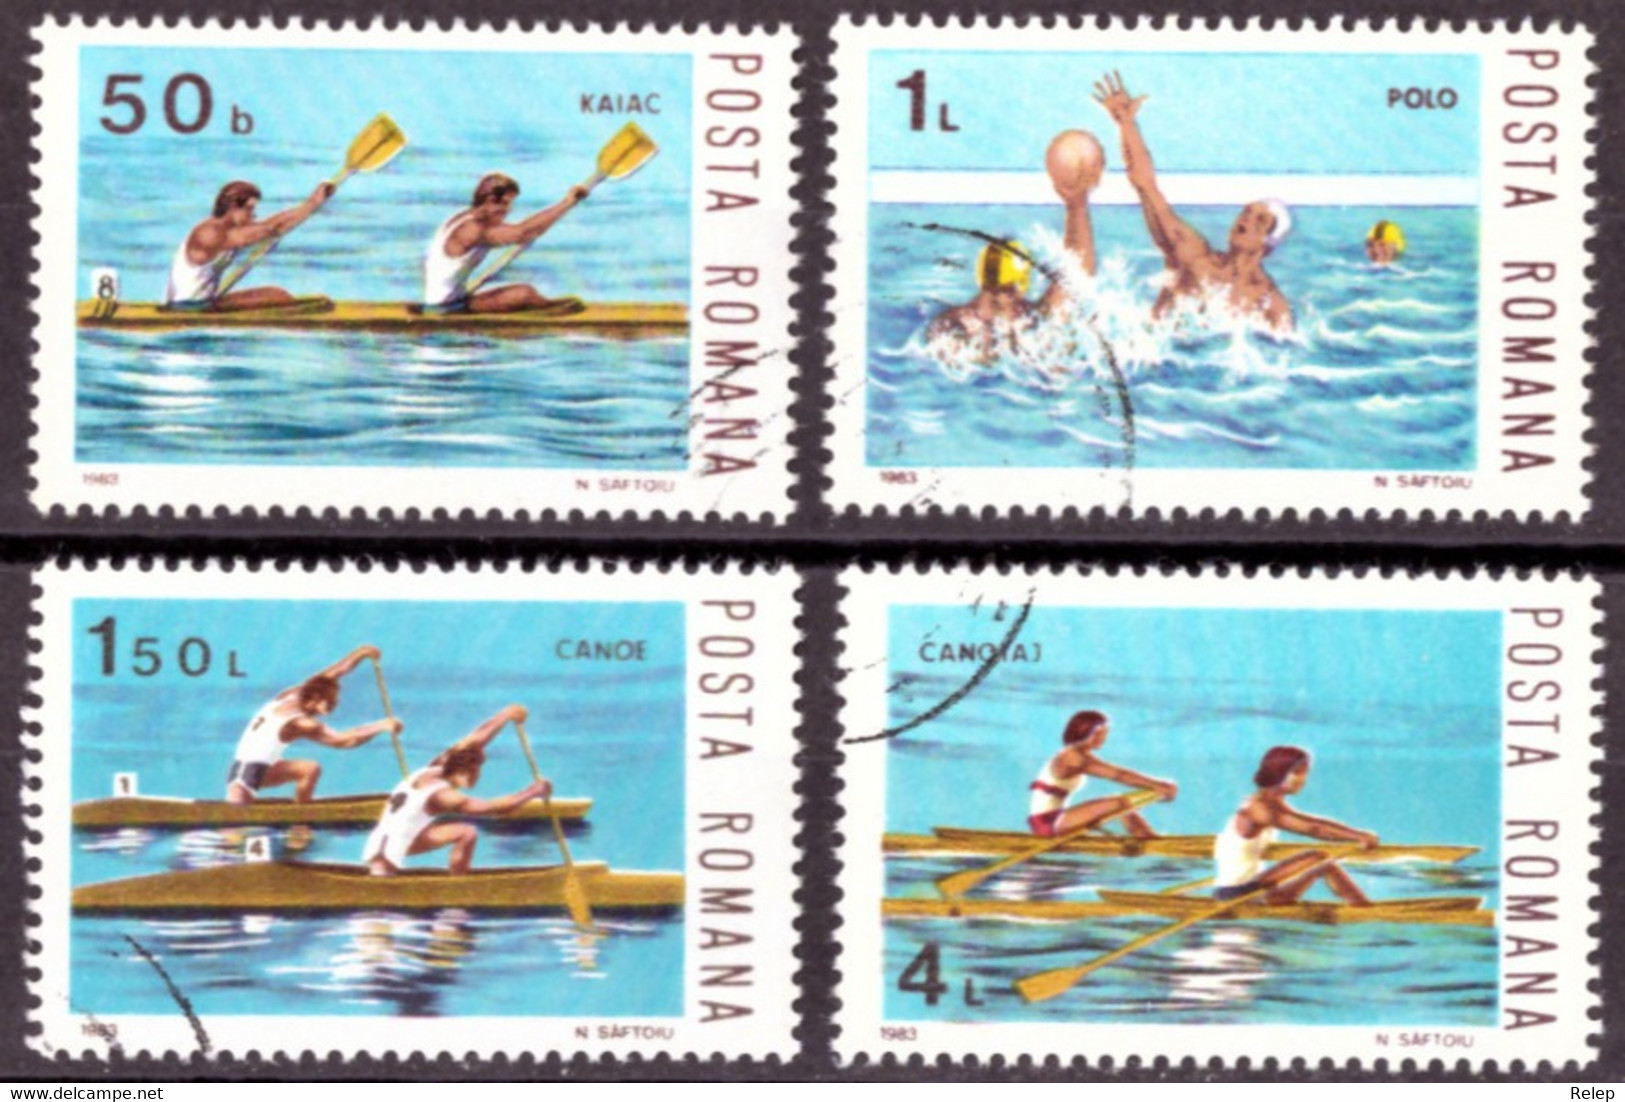 Water Sports, Competition - Lot 1326 -TB- - Waterpolo